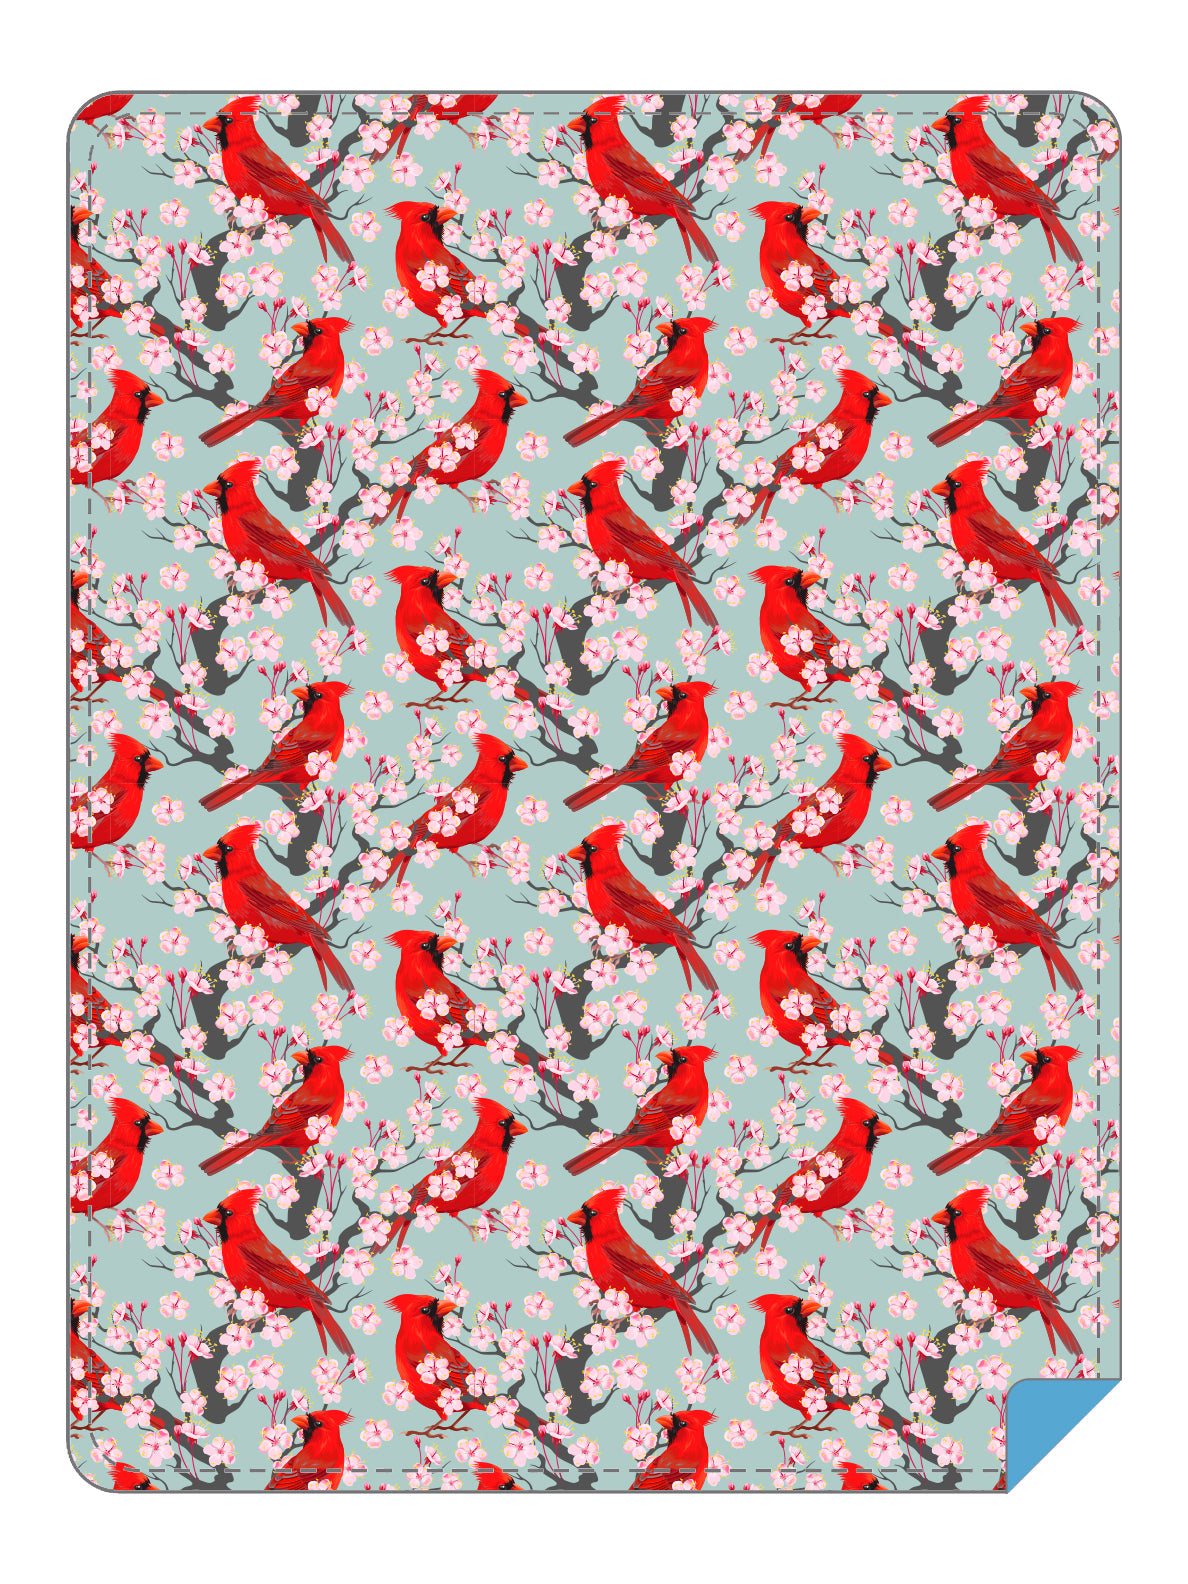 BRIEF INSANITY Snuggle Butt Cardinal Floral Plush Throw Blanket Graphic